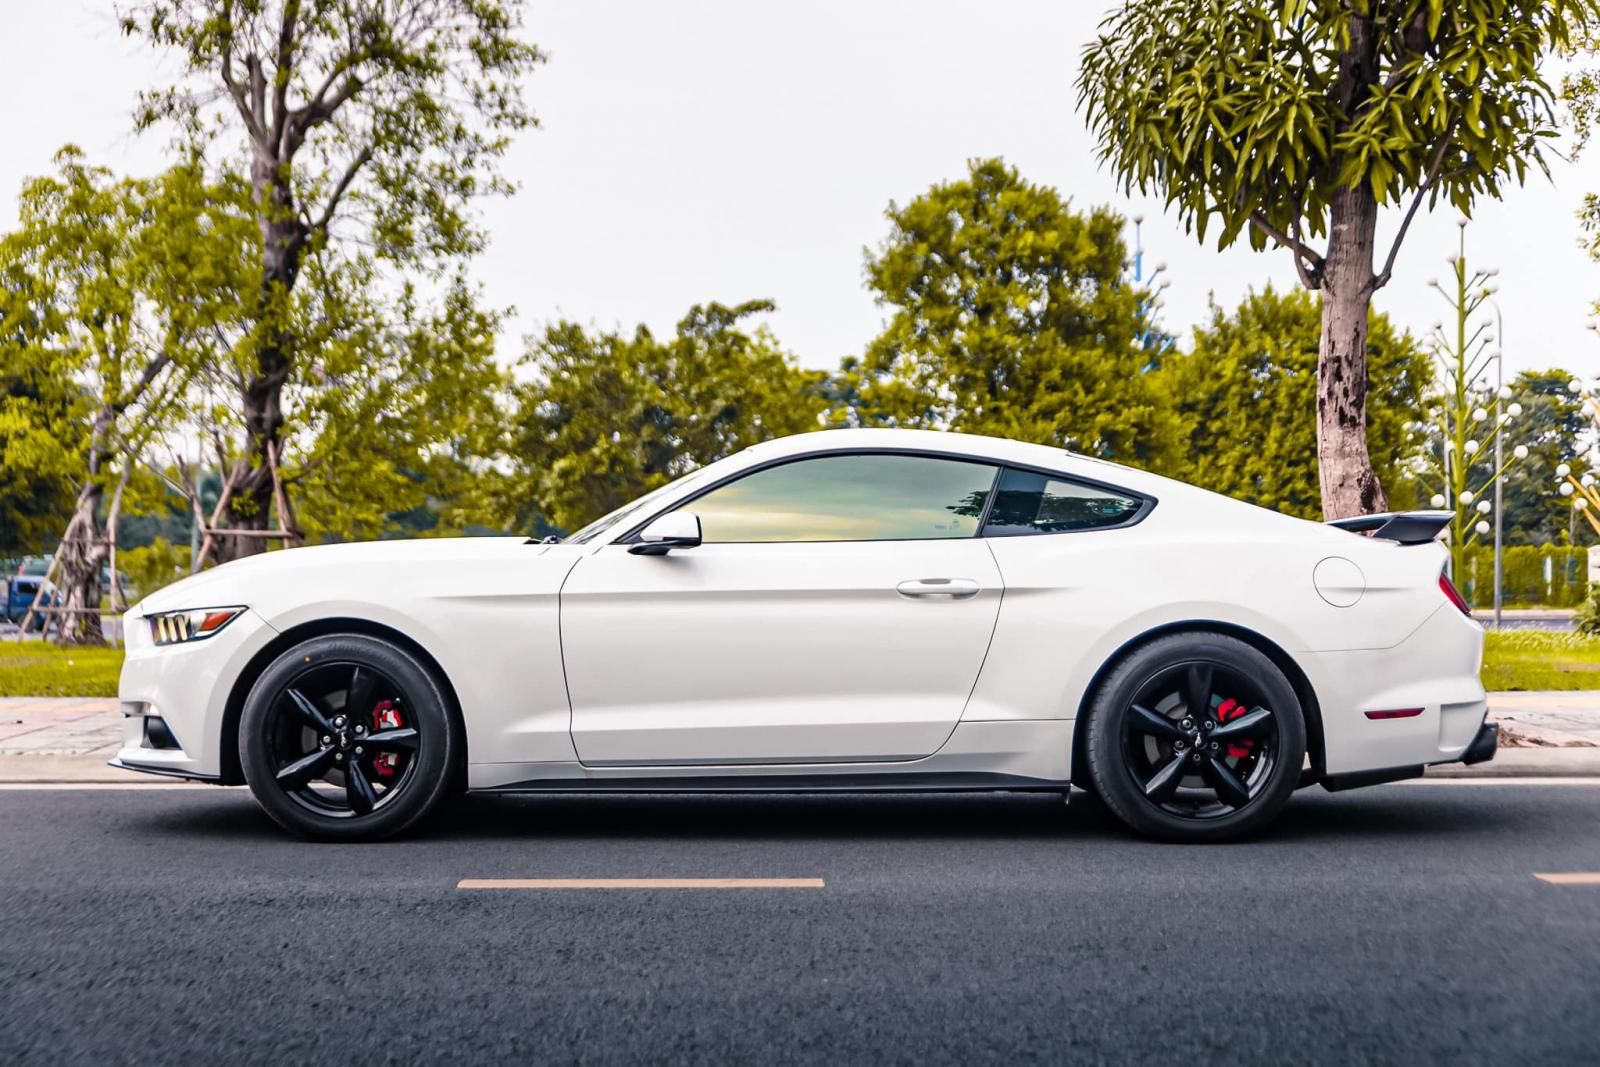 Ford Mustang 2014 - Ford Mustang 2014